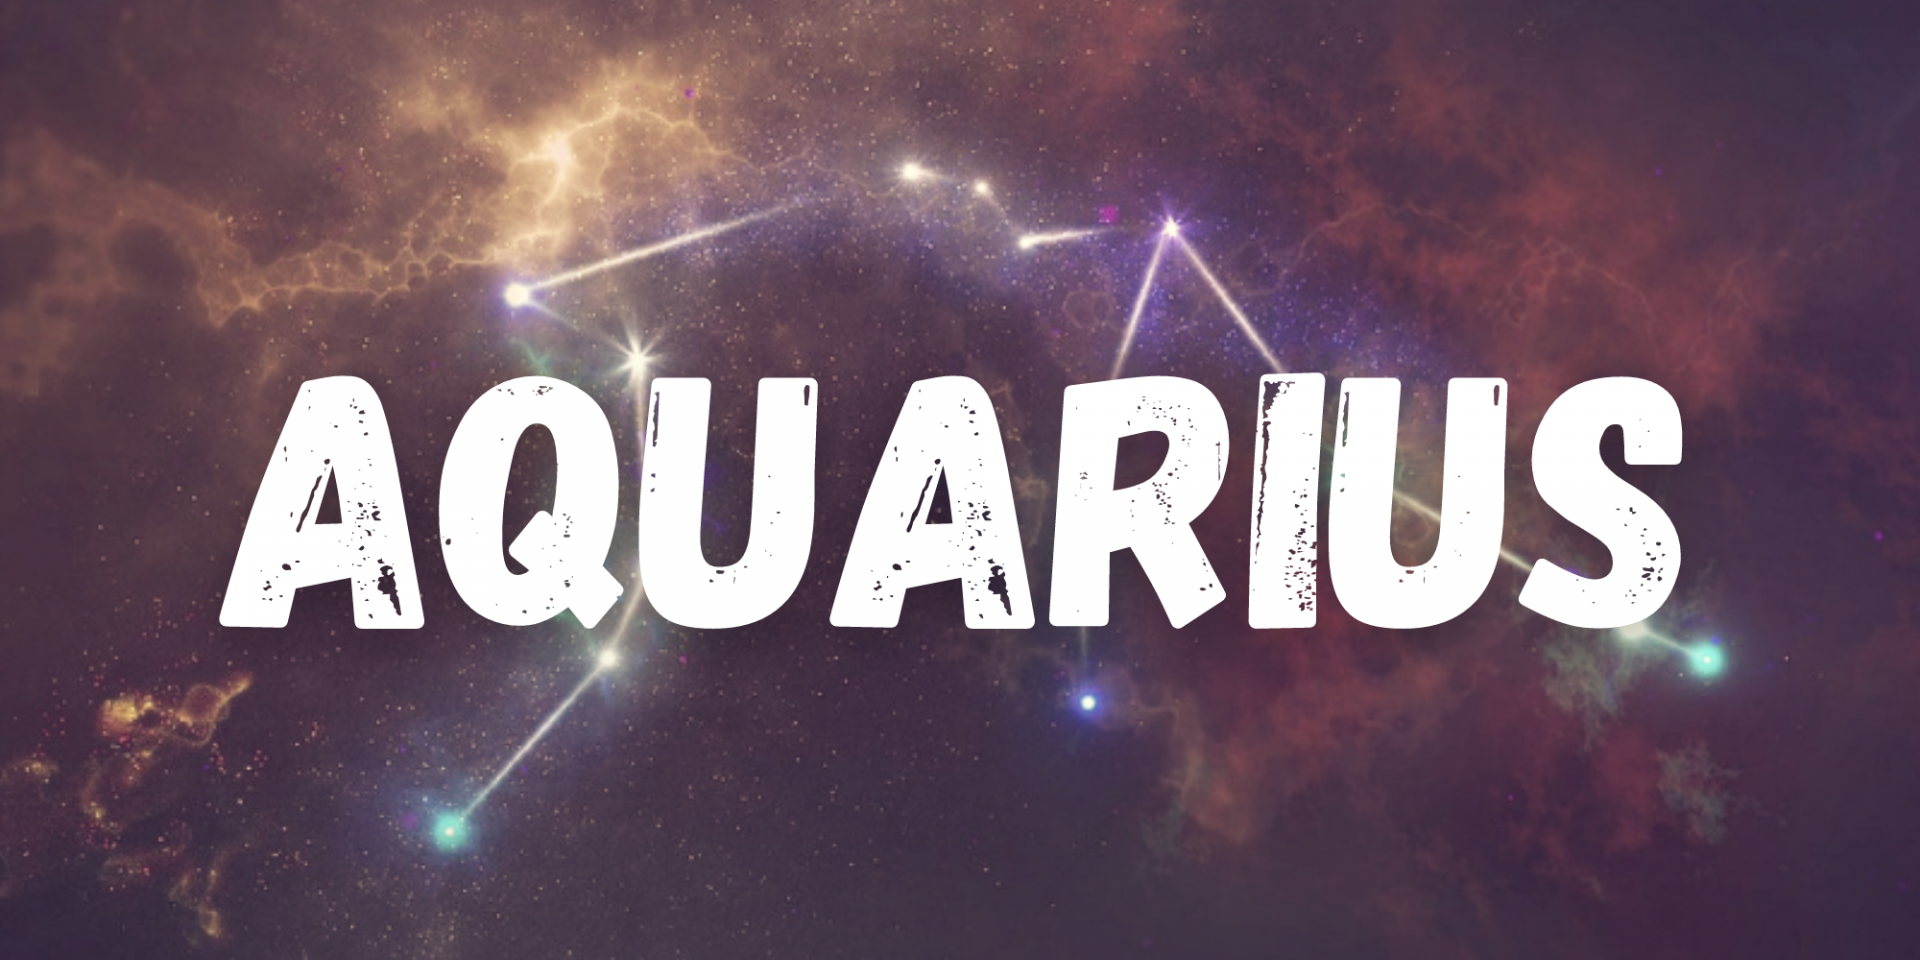 AQUARIUS Weekly Horoscope 2 - August 8, 2021: Prediction for Love, Health, Financial and Work